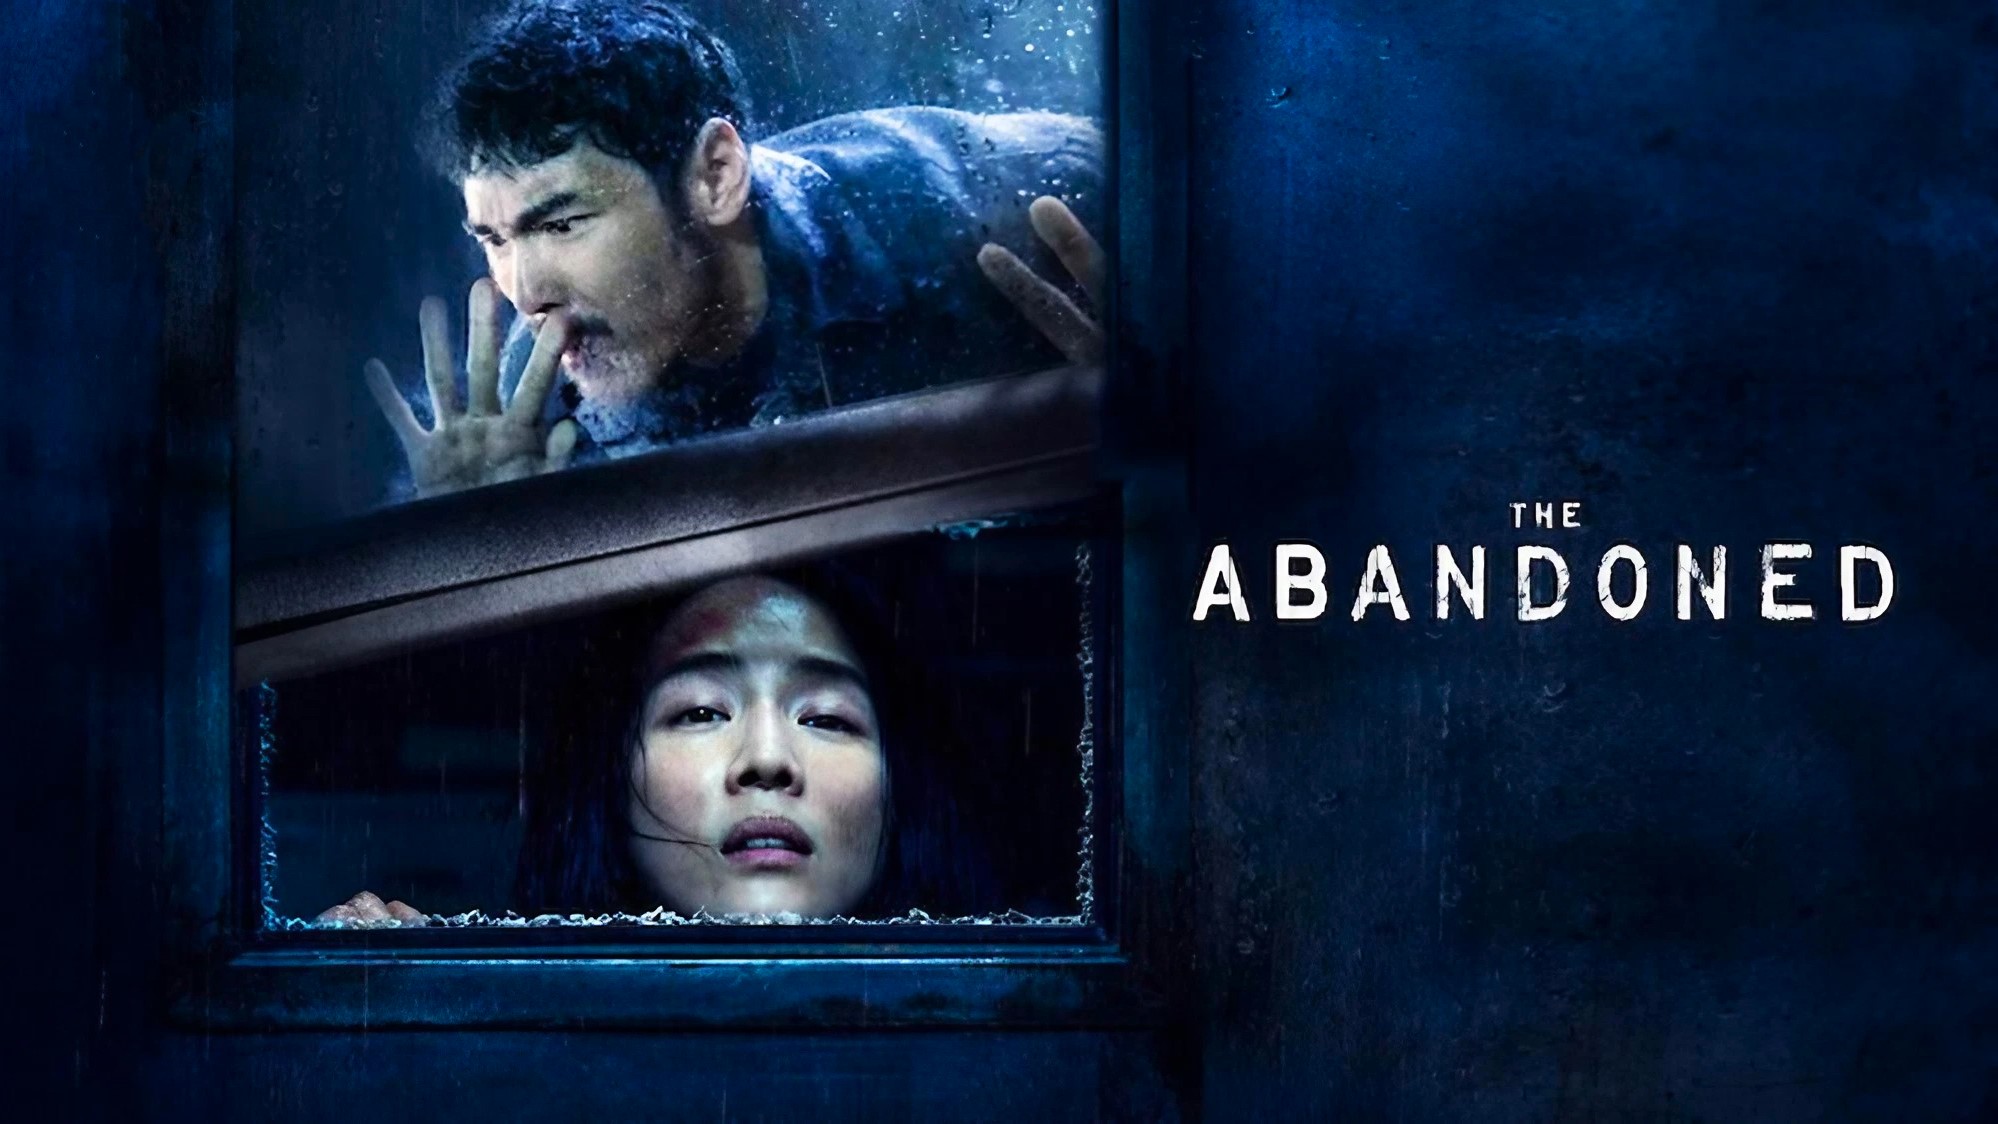 Is Netflix’s The Abandoned Based on Real Serial Killings